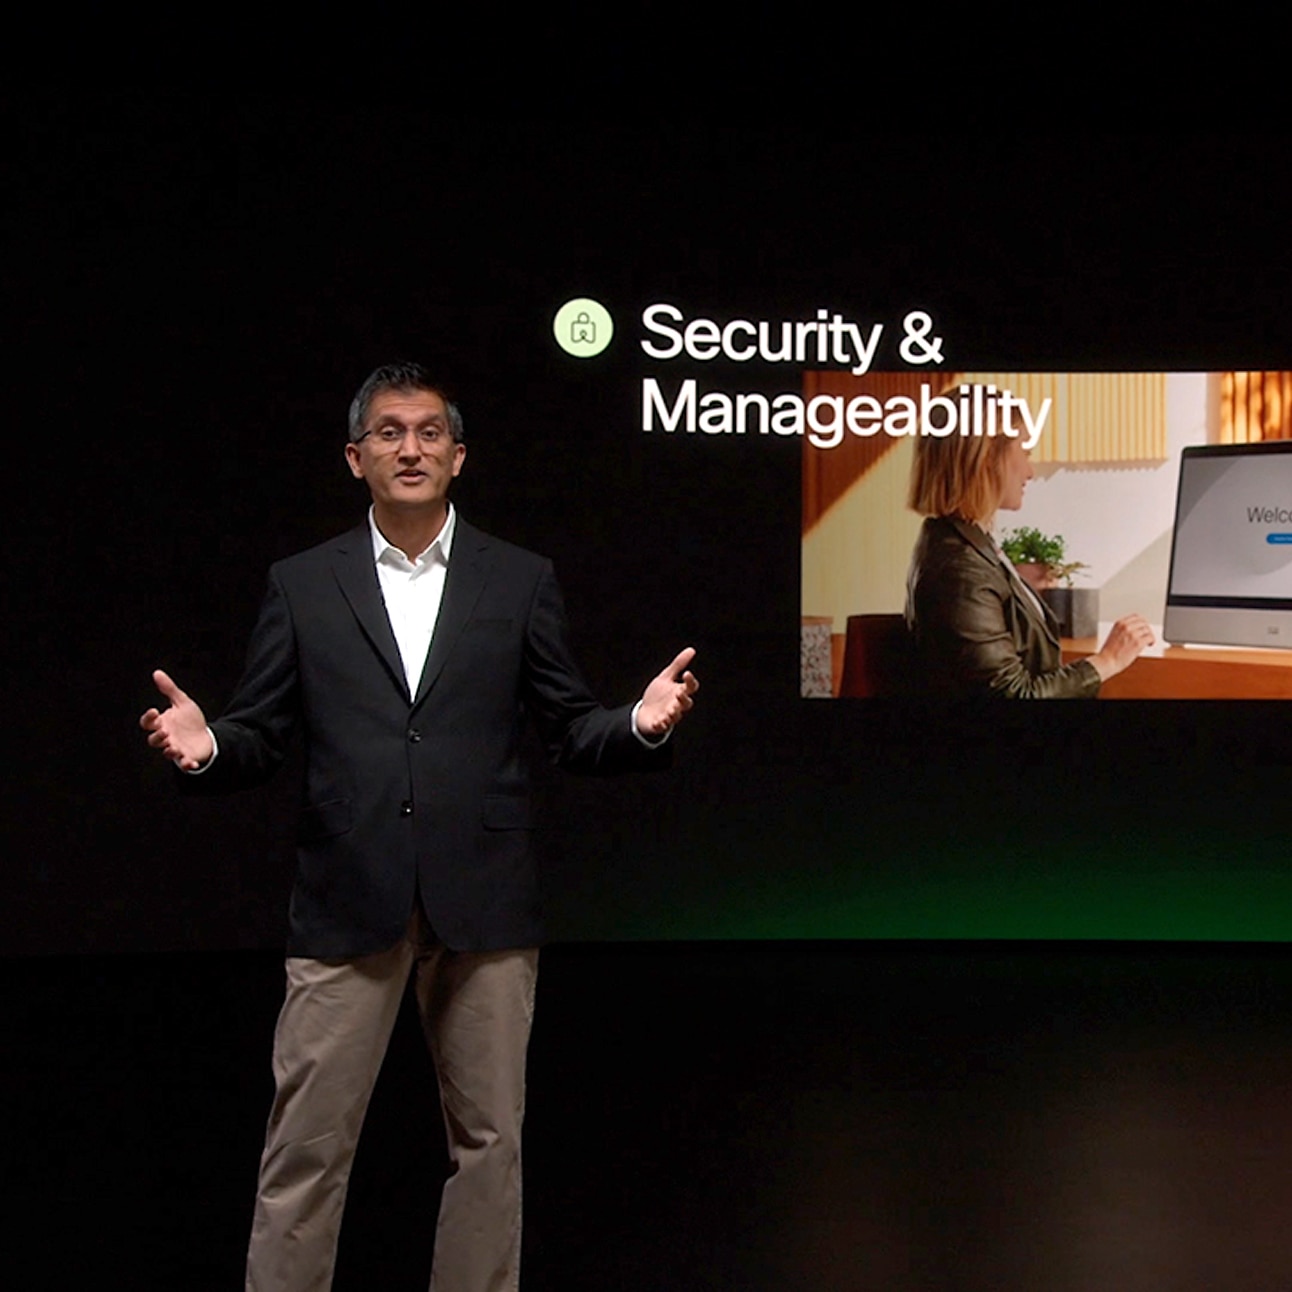 Cisco's Javed Khan presents onstage at WebexOne 2022. Screen behind him displays the words Security & Manageability.